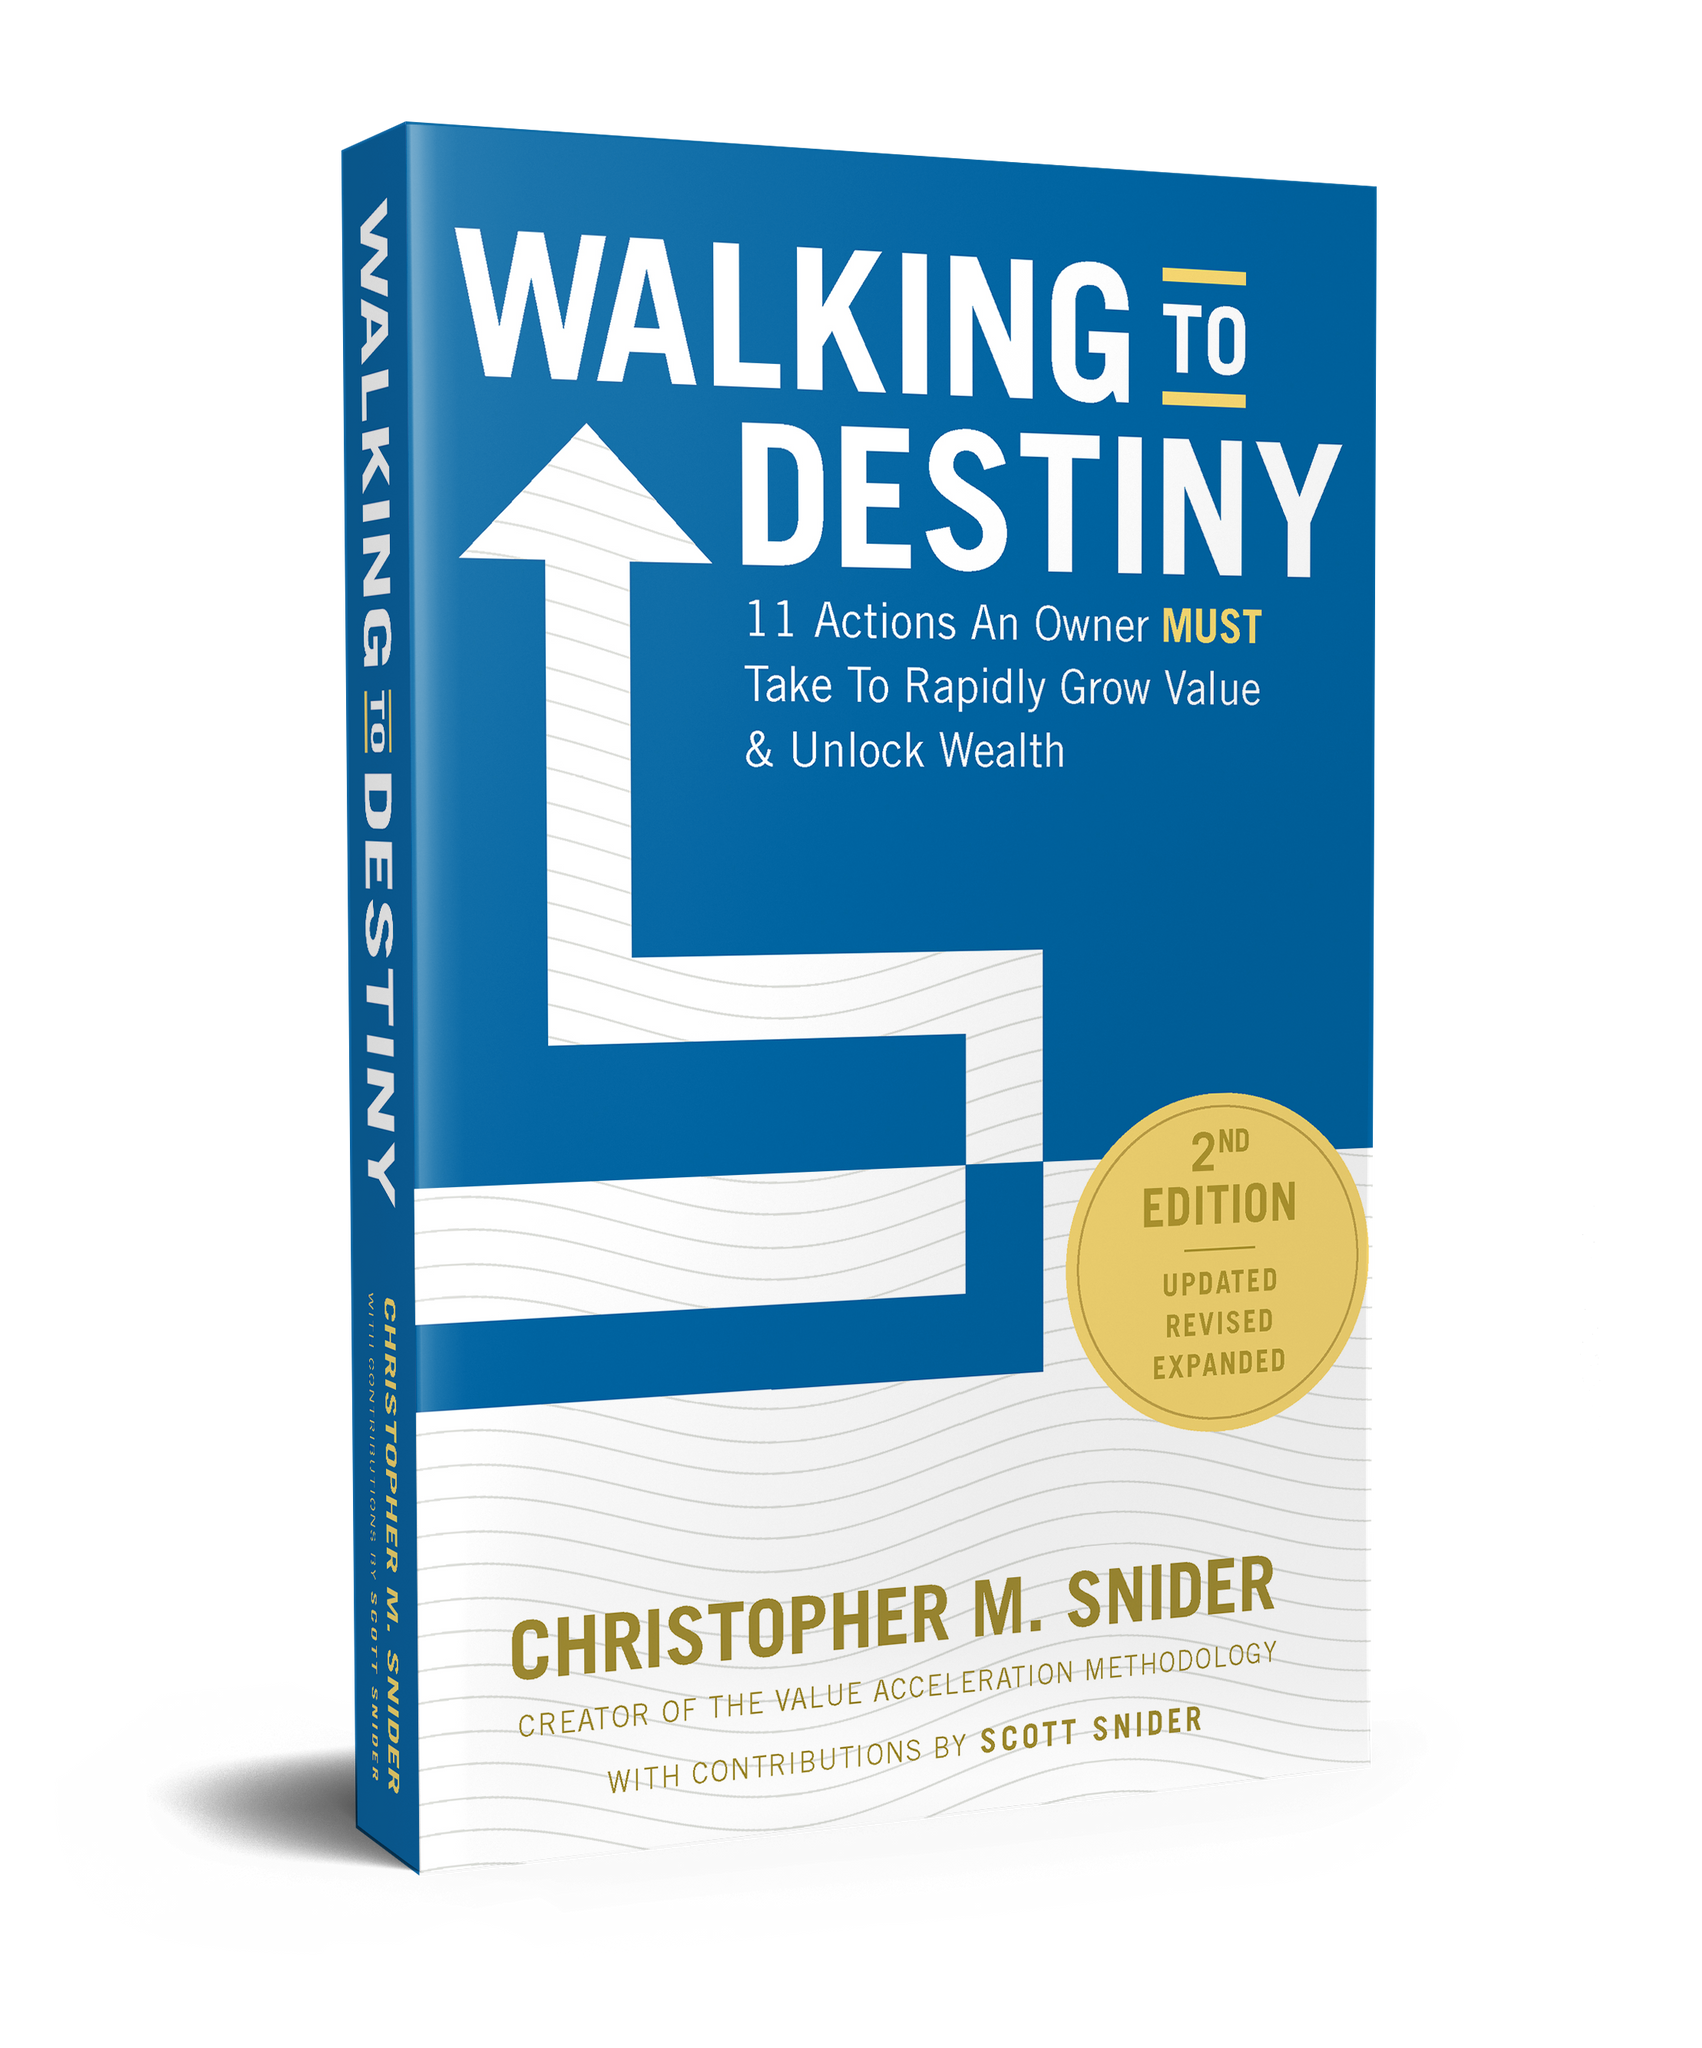 Walking to Destiny: 11 Actions an Owner Must Take to Rapidly Grow Value and Unlock Wealth (Divestopedia)